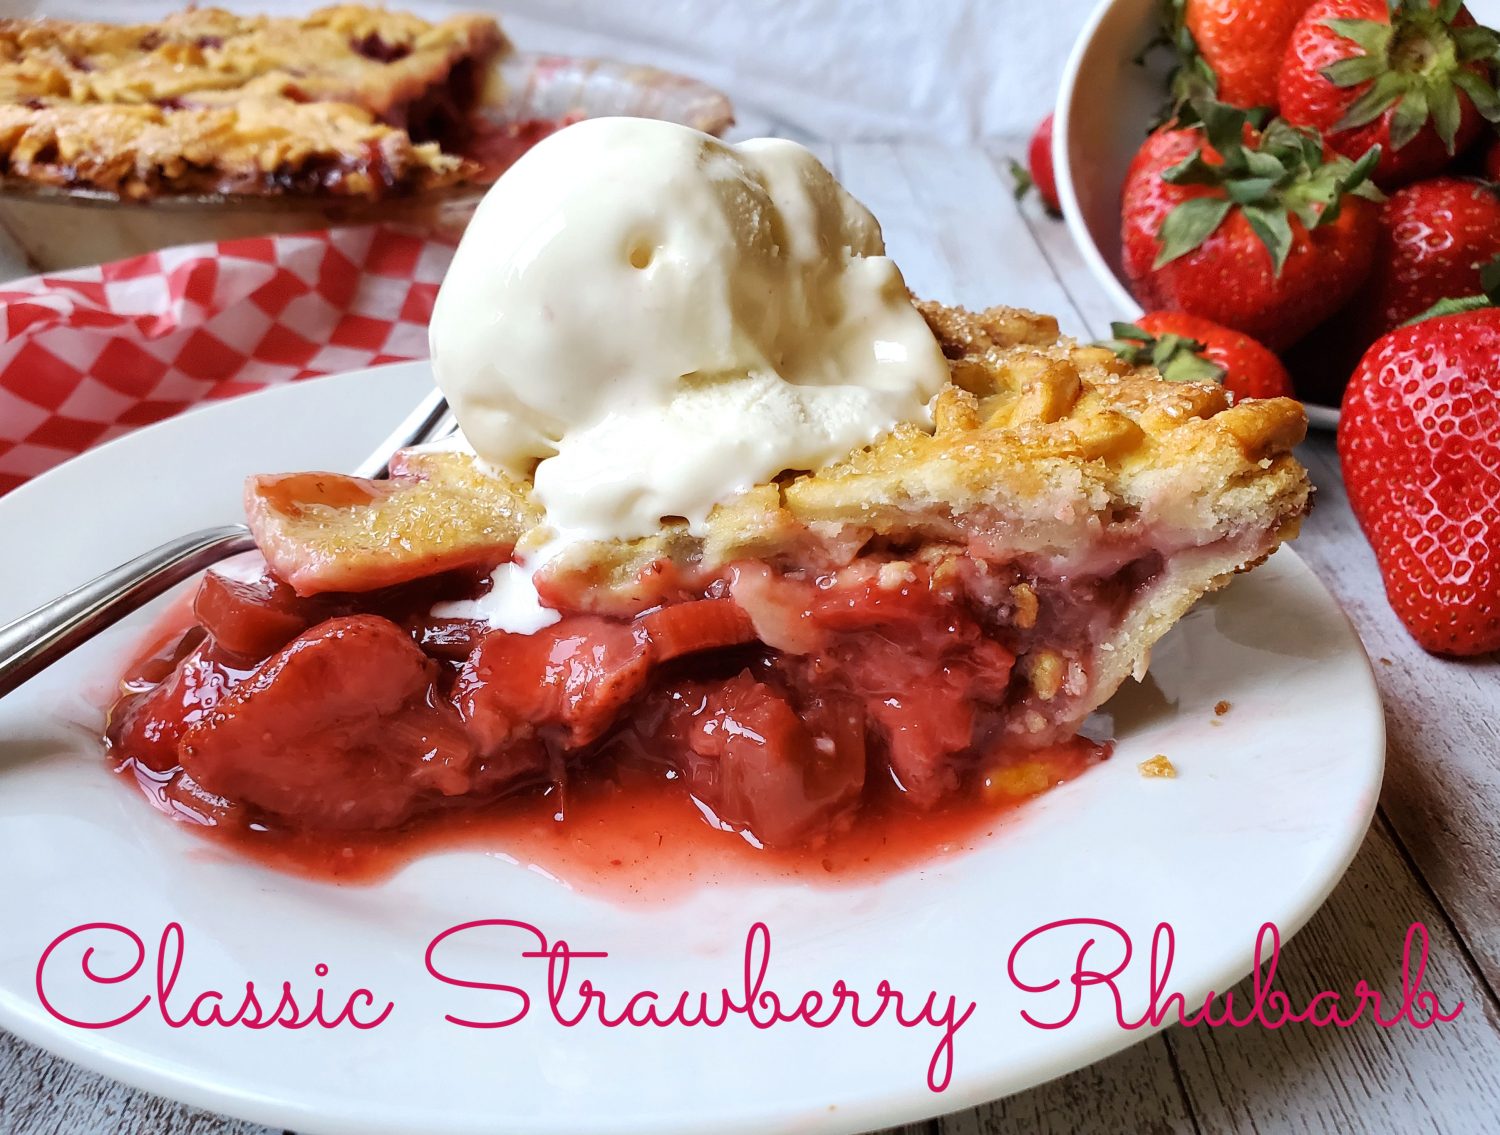 Fresh picked strawberries and garden ripe rhubarb with a pinch of anise & cinnamon and baked in a buttery flaky crust, grandma's classic.